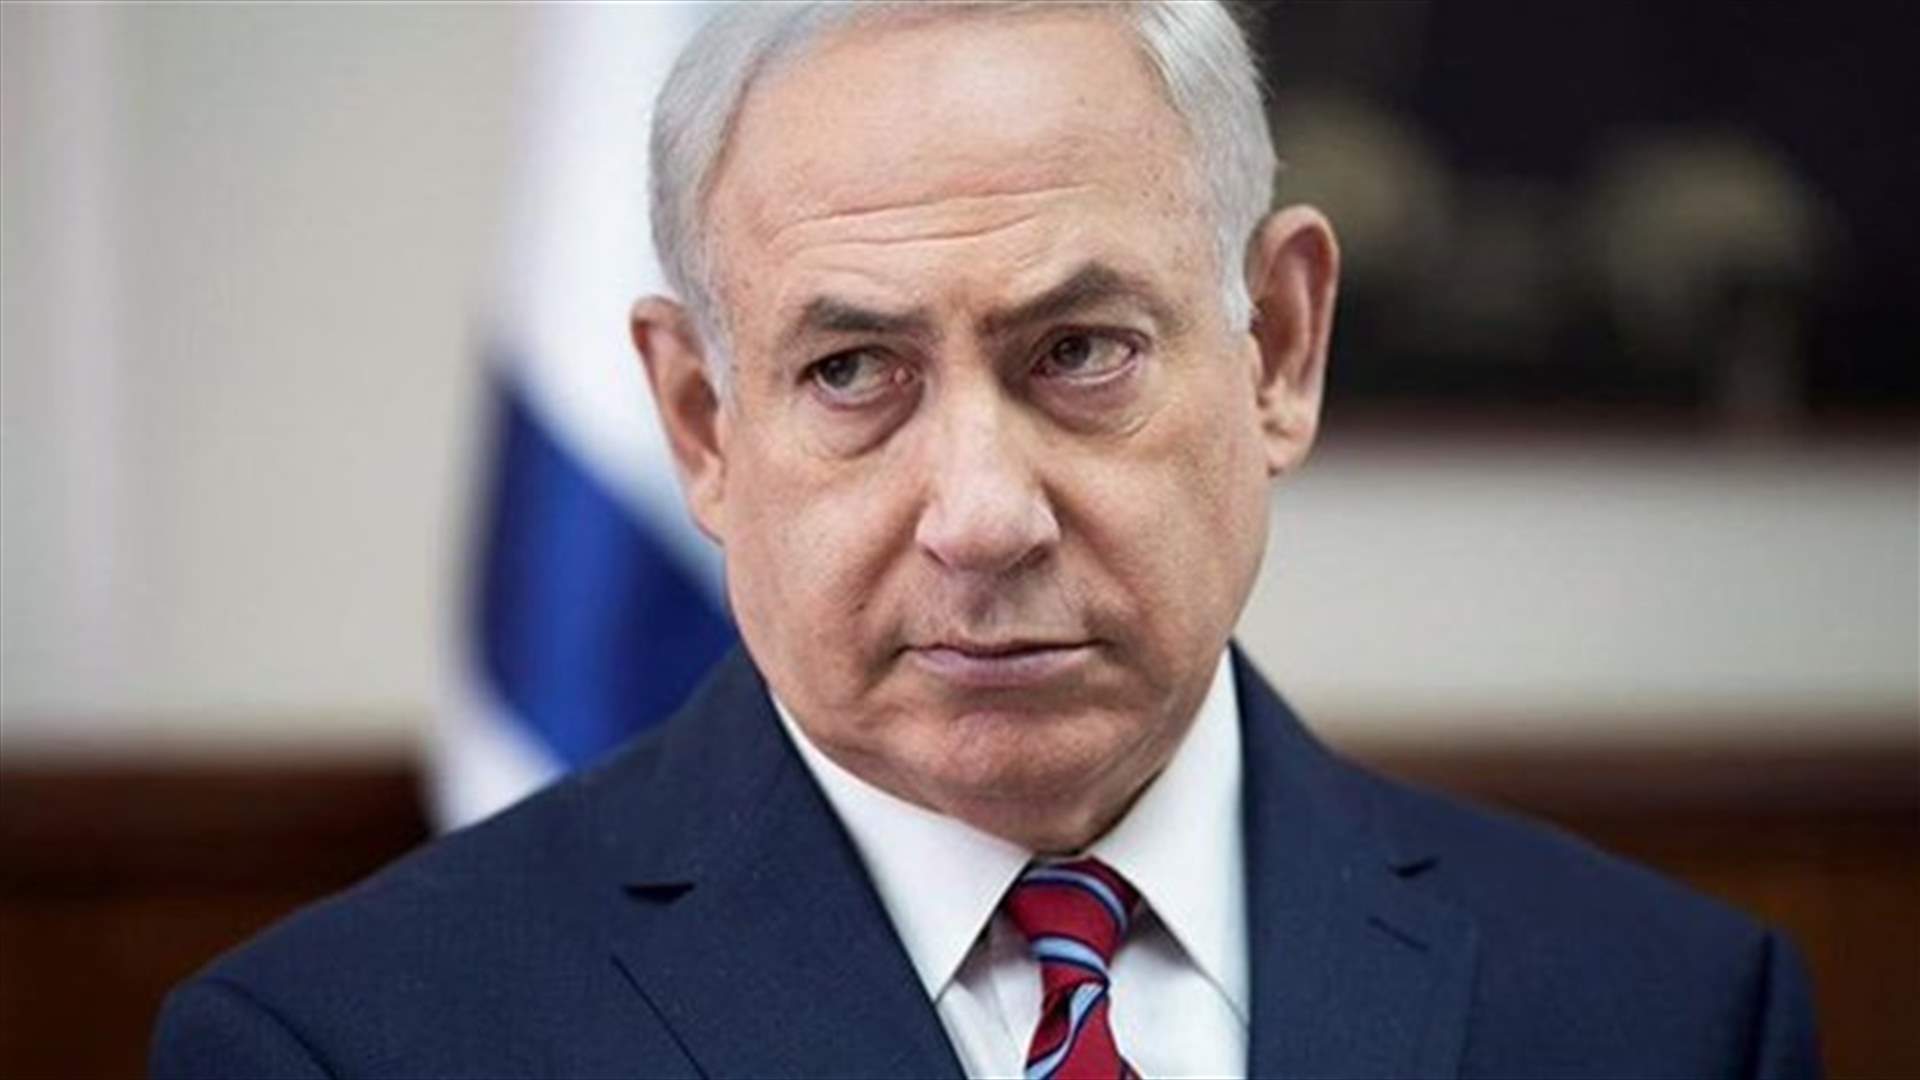 Netanyahu questioned again in telecoms case, sees it &quot;collapsing&quot;